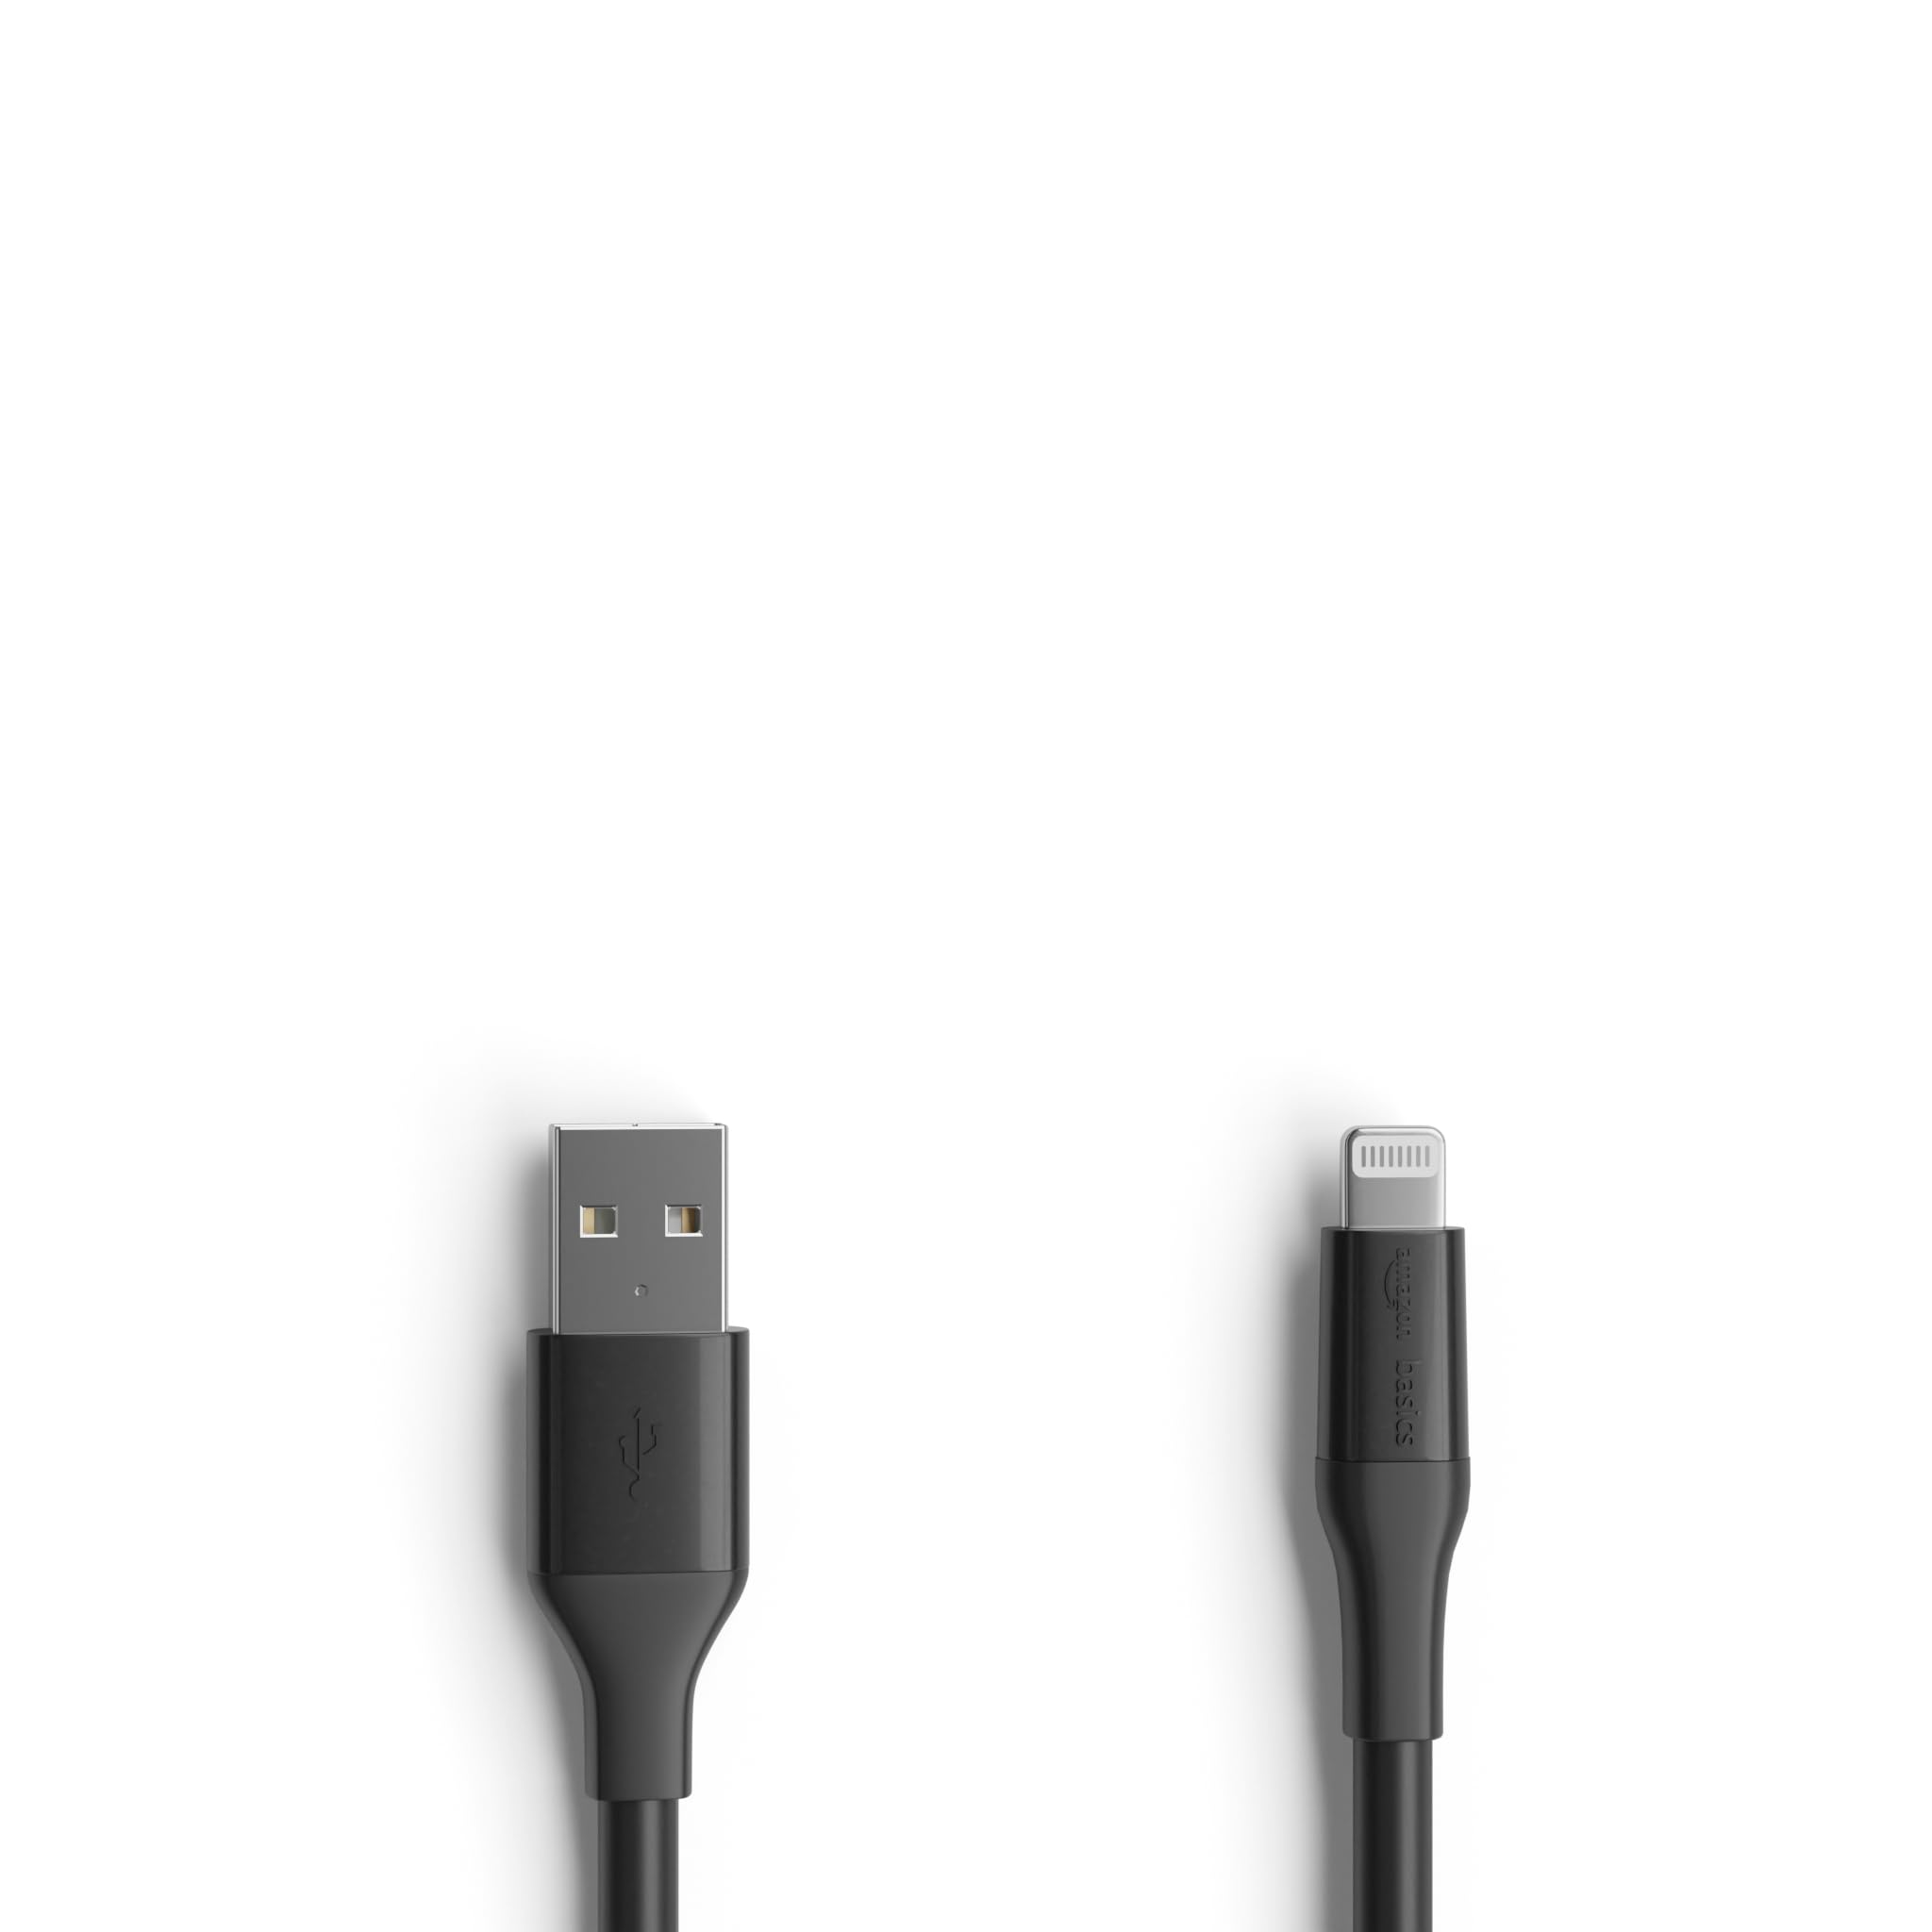 Amazon Basics Lightning to USB-A Cable for iPhone, 10 Feet, Black